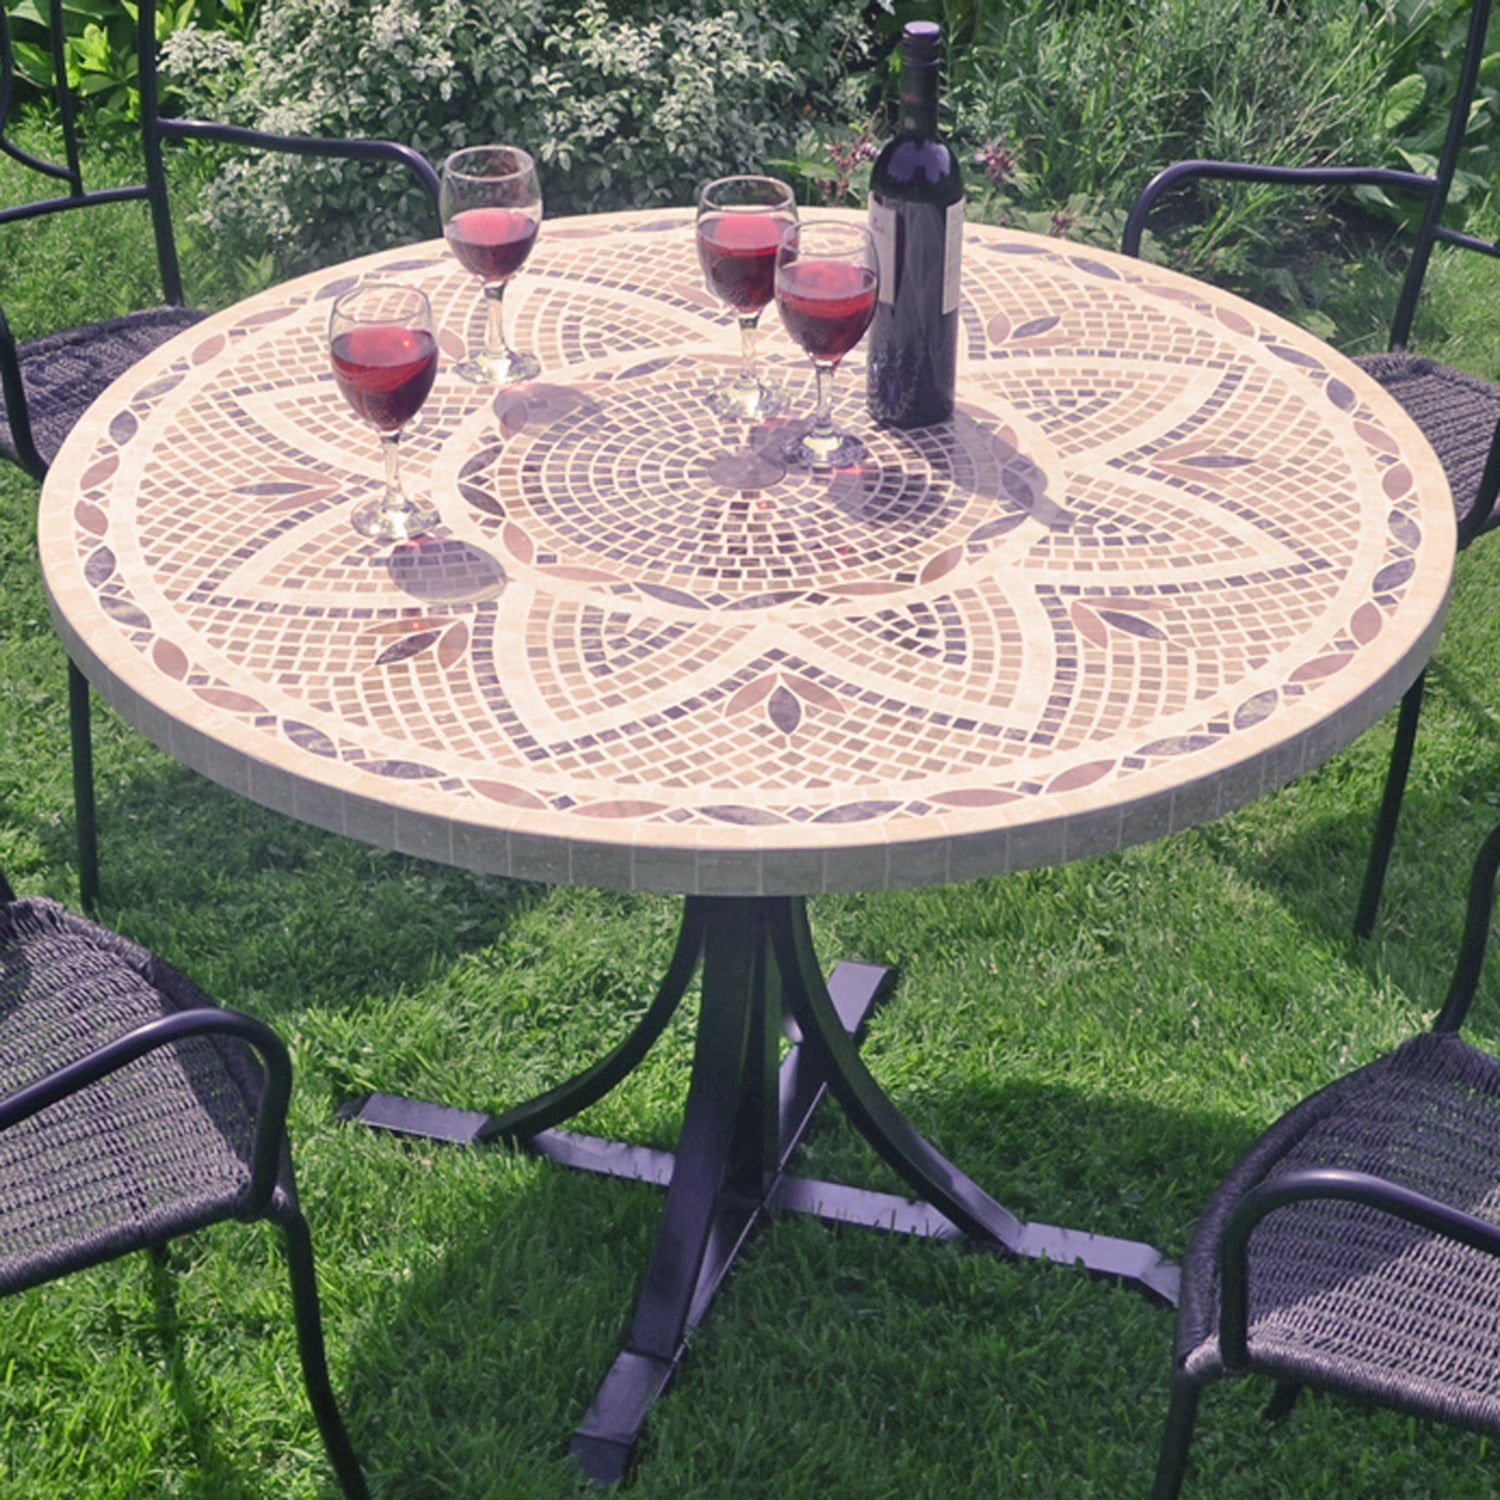 Byron Manor Montpellier Mosaic Stone Garden Dining Table With 4 Dorchester Wicker Chairs Dining Sets Byron Manor   